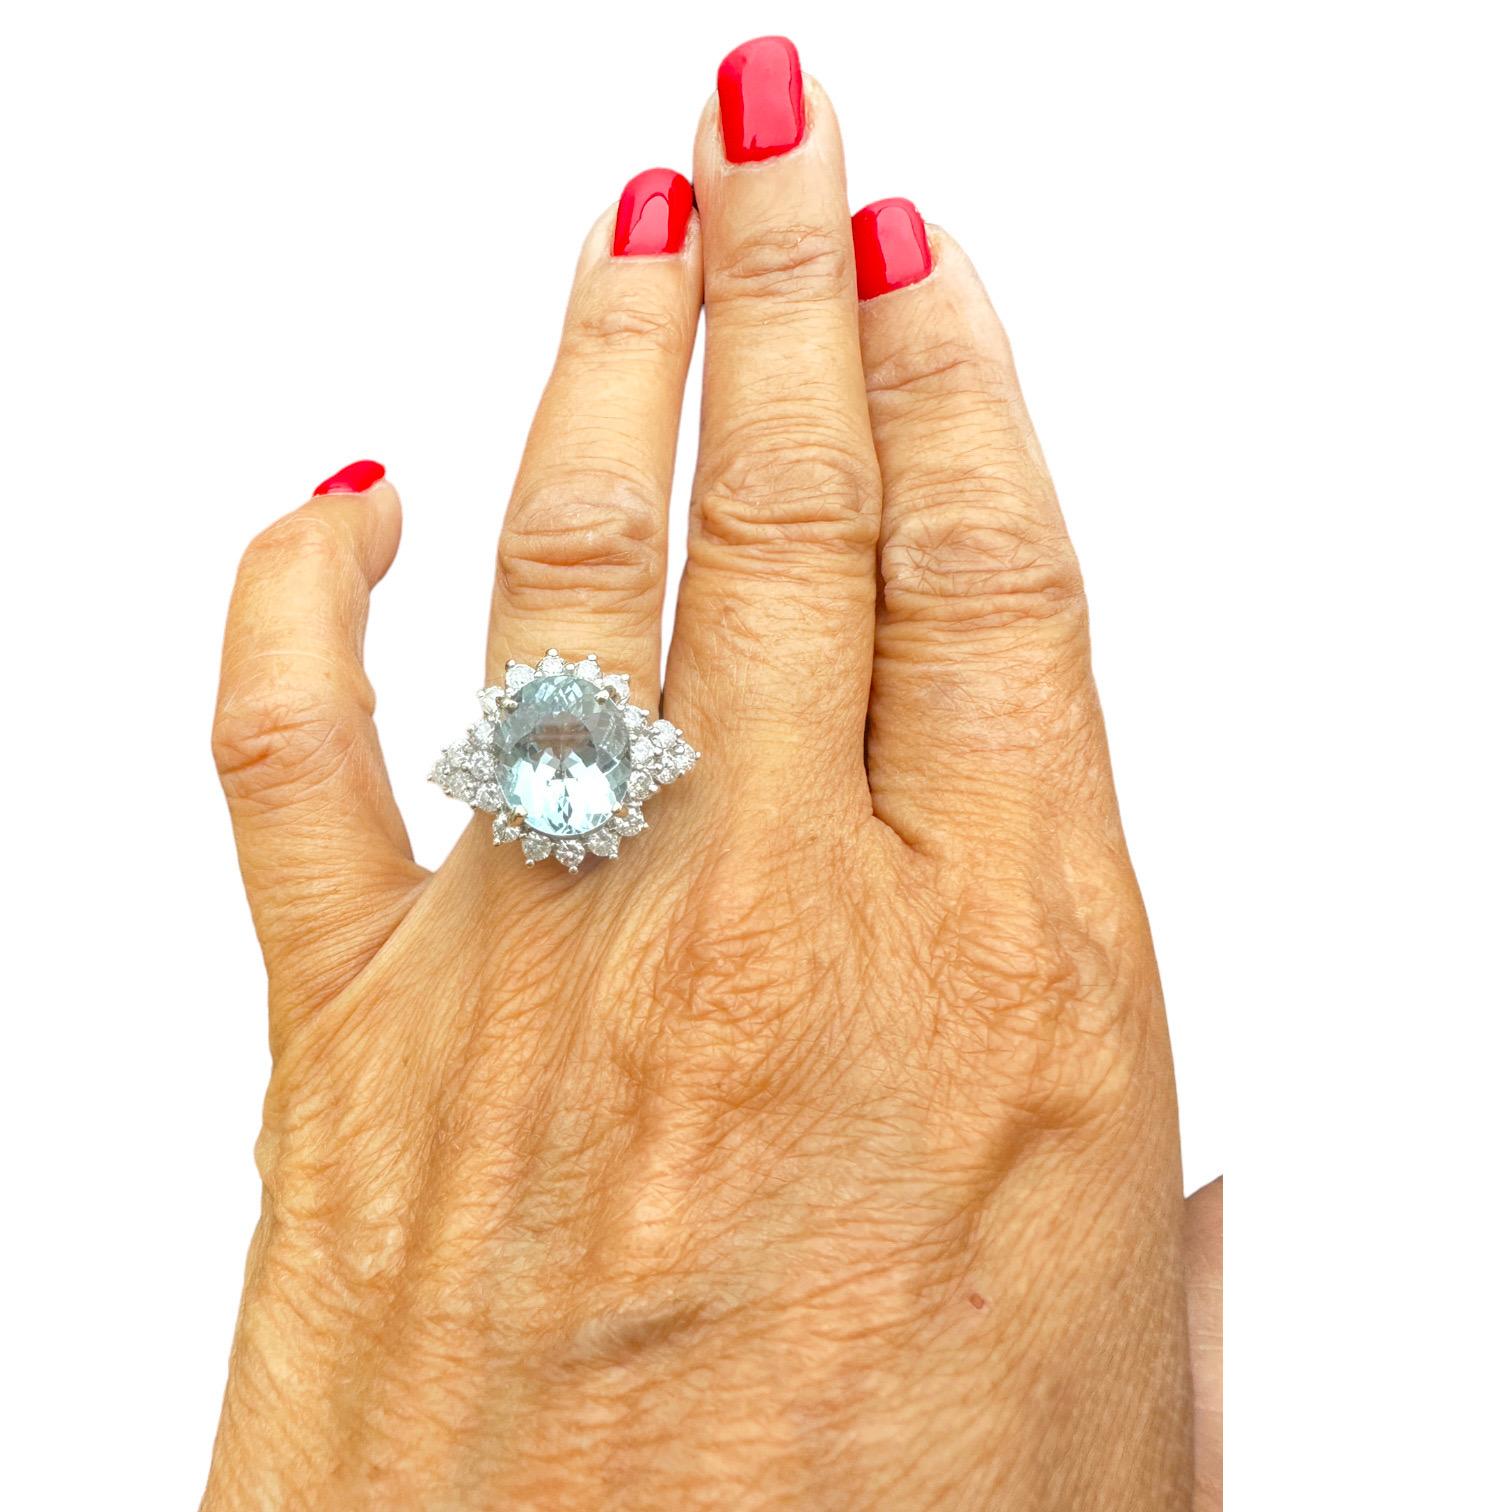 This exquisite Aquamarine halo diamond ring is an eye-catching piece of jewelry. It features an oval-shaped Aquamarine stone set in a diamond halo with a shimmering band. The diamonds used in the halo are of brilliant shine, with long-lasting